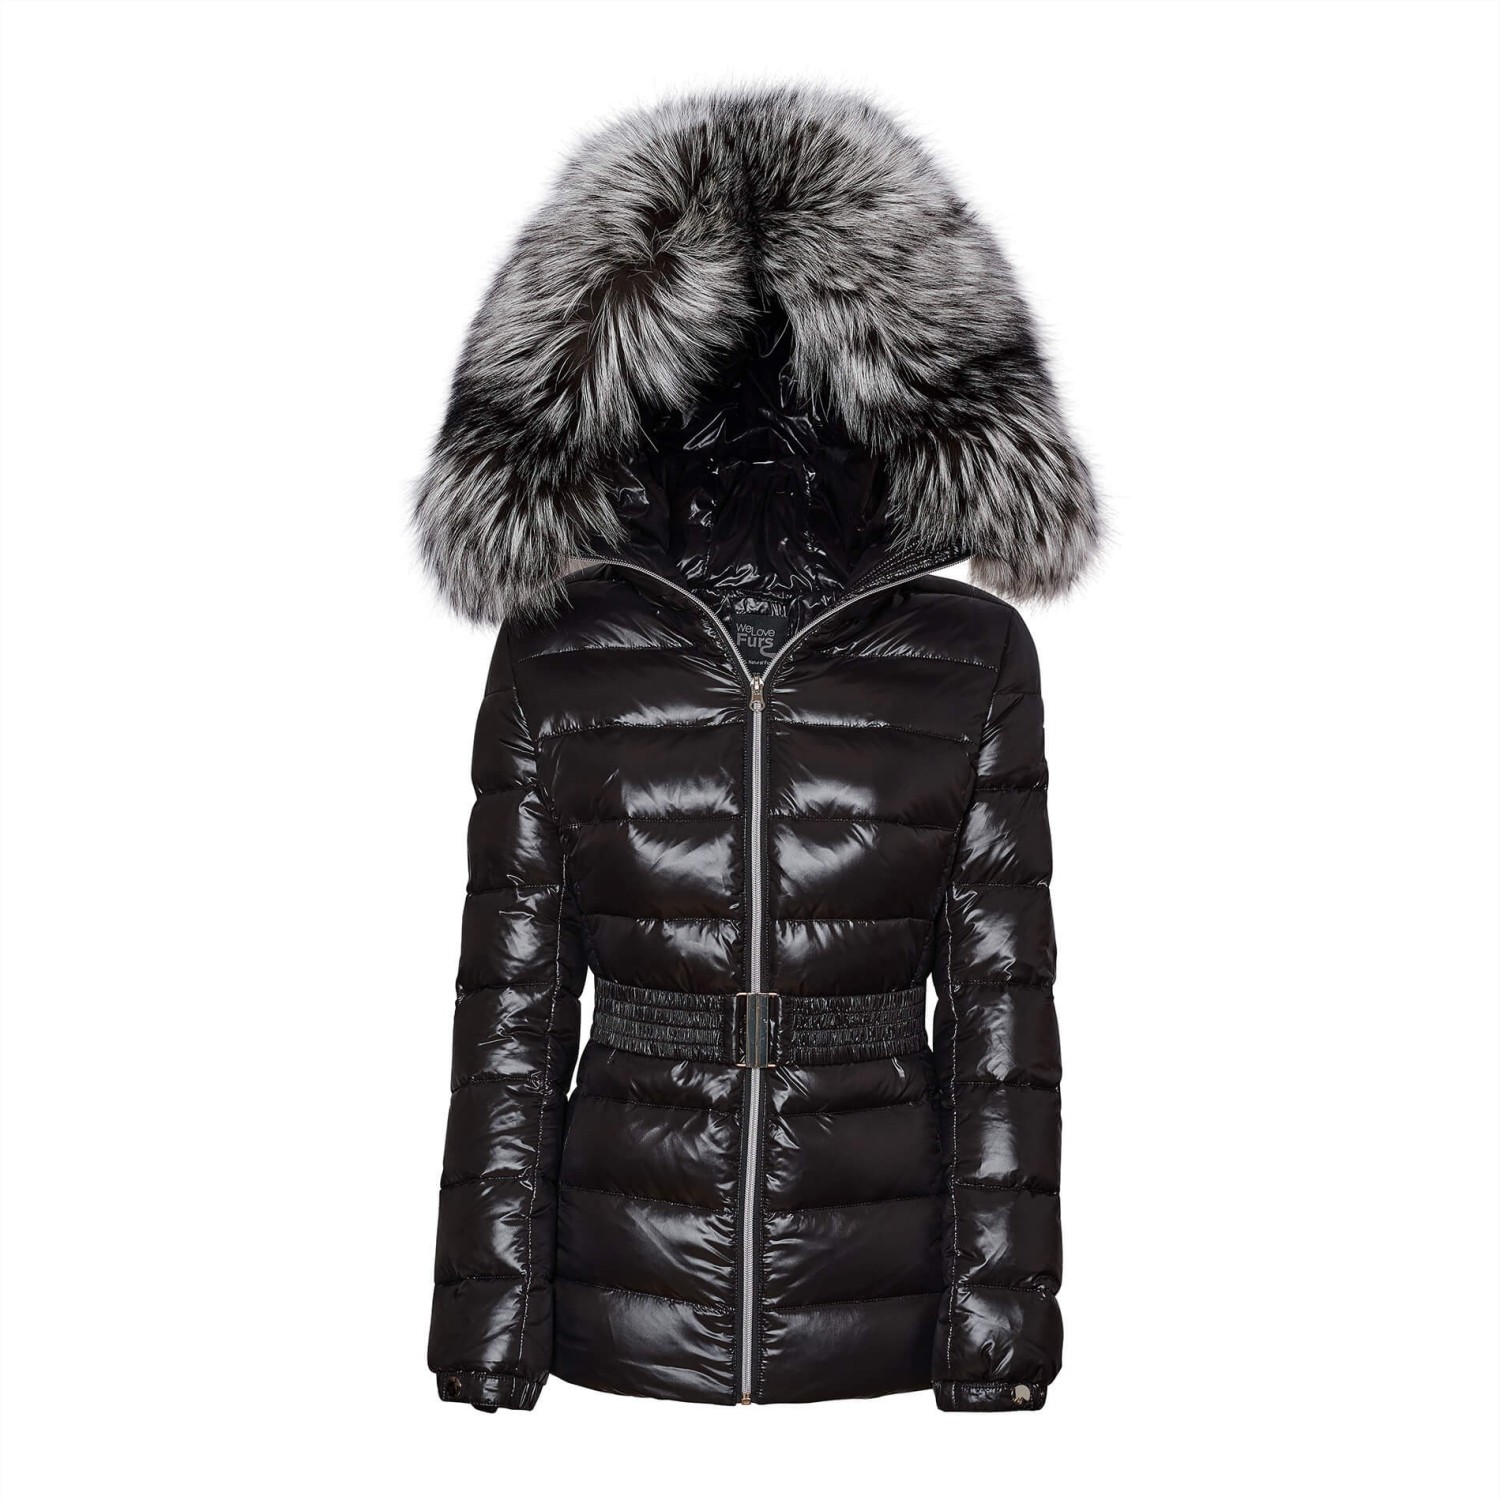 Down jacket with fur